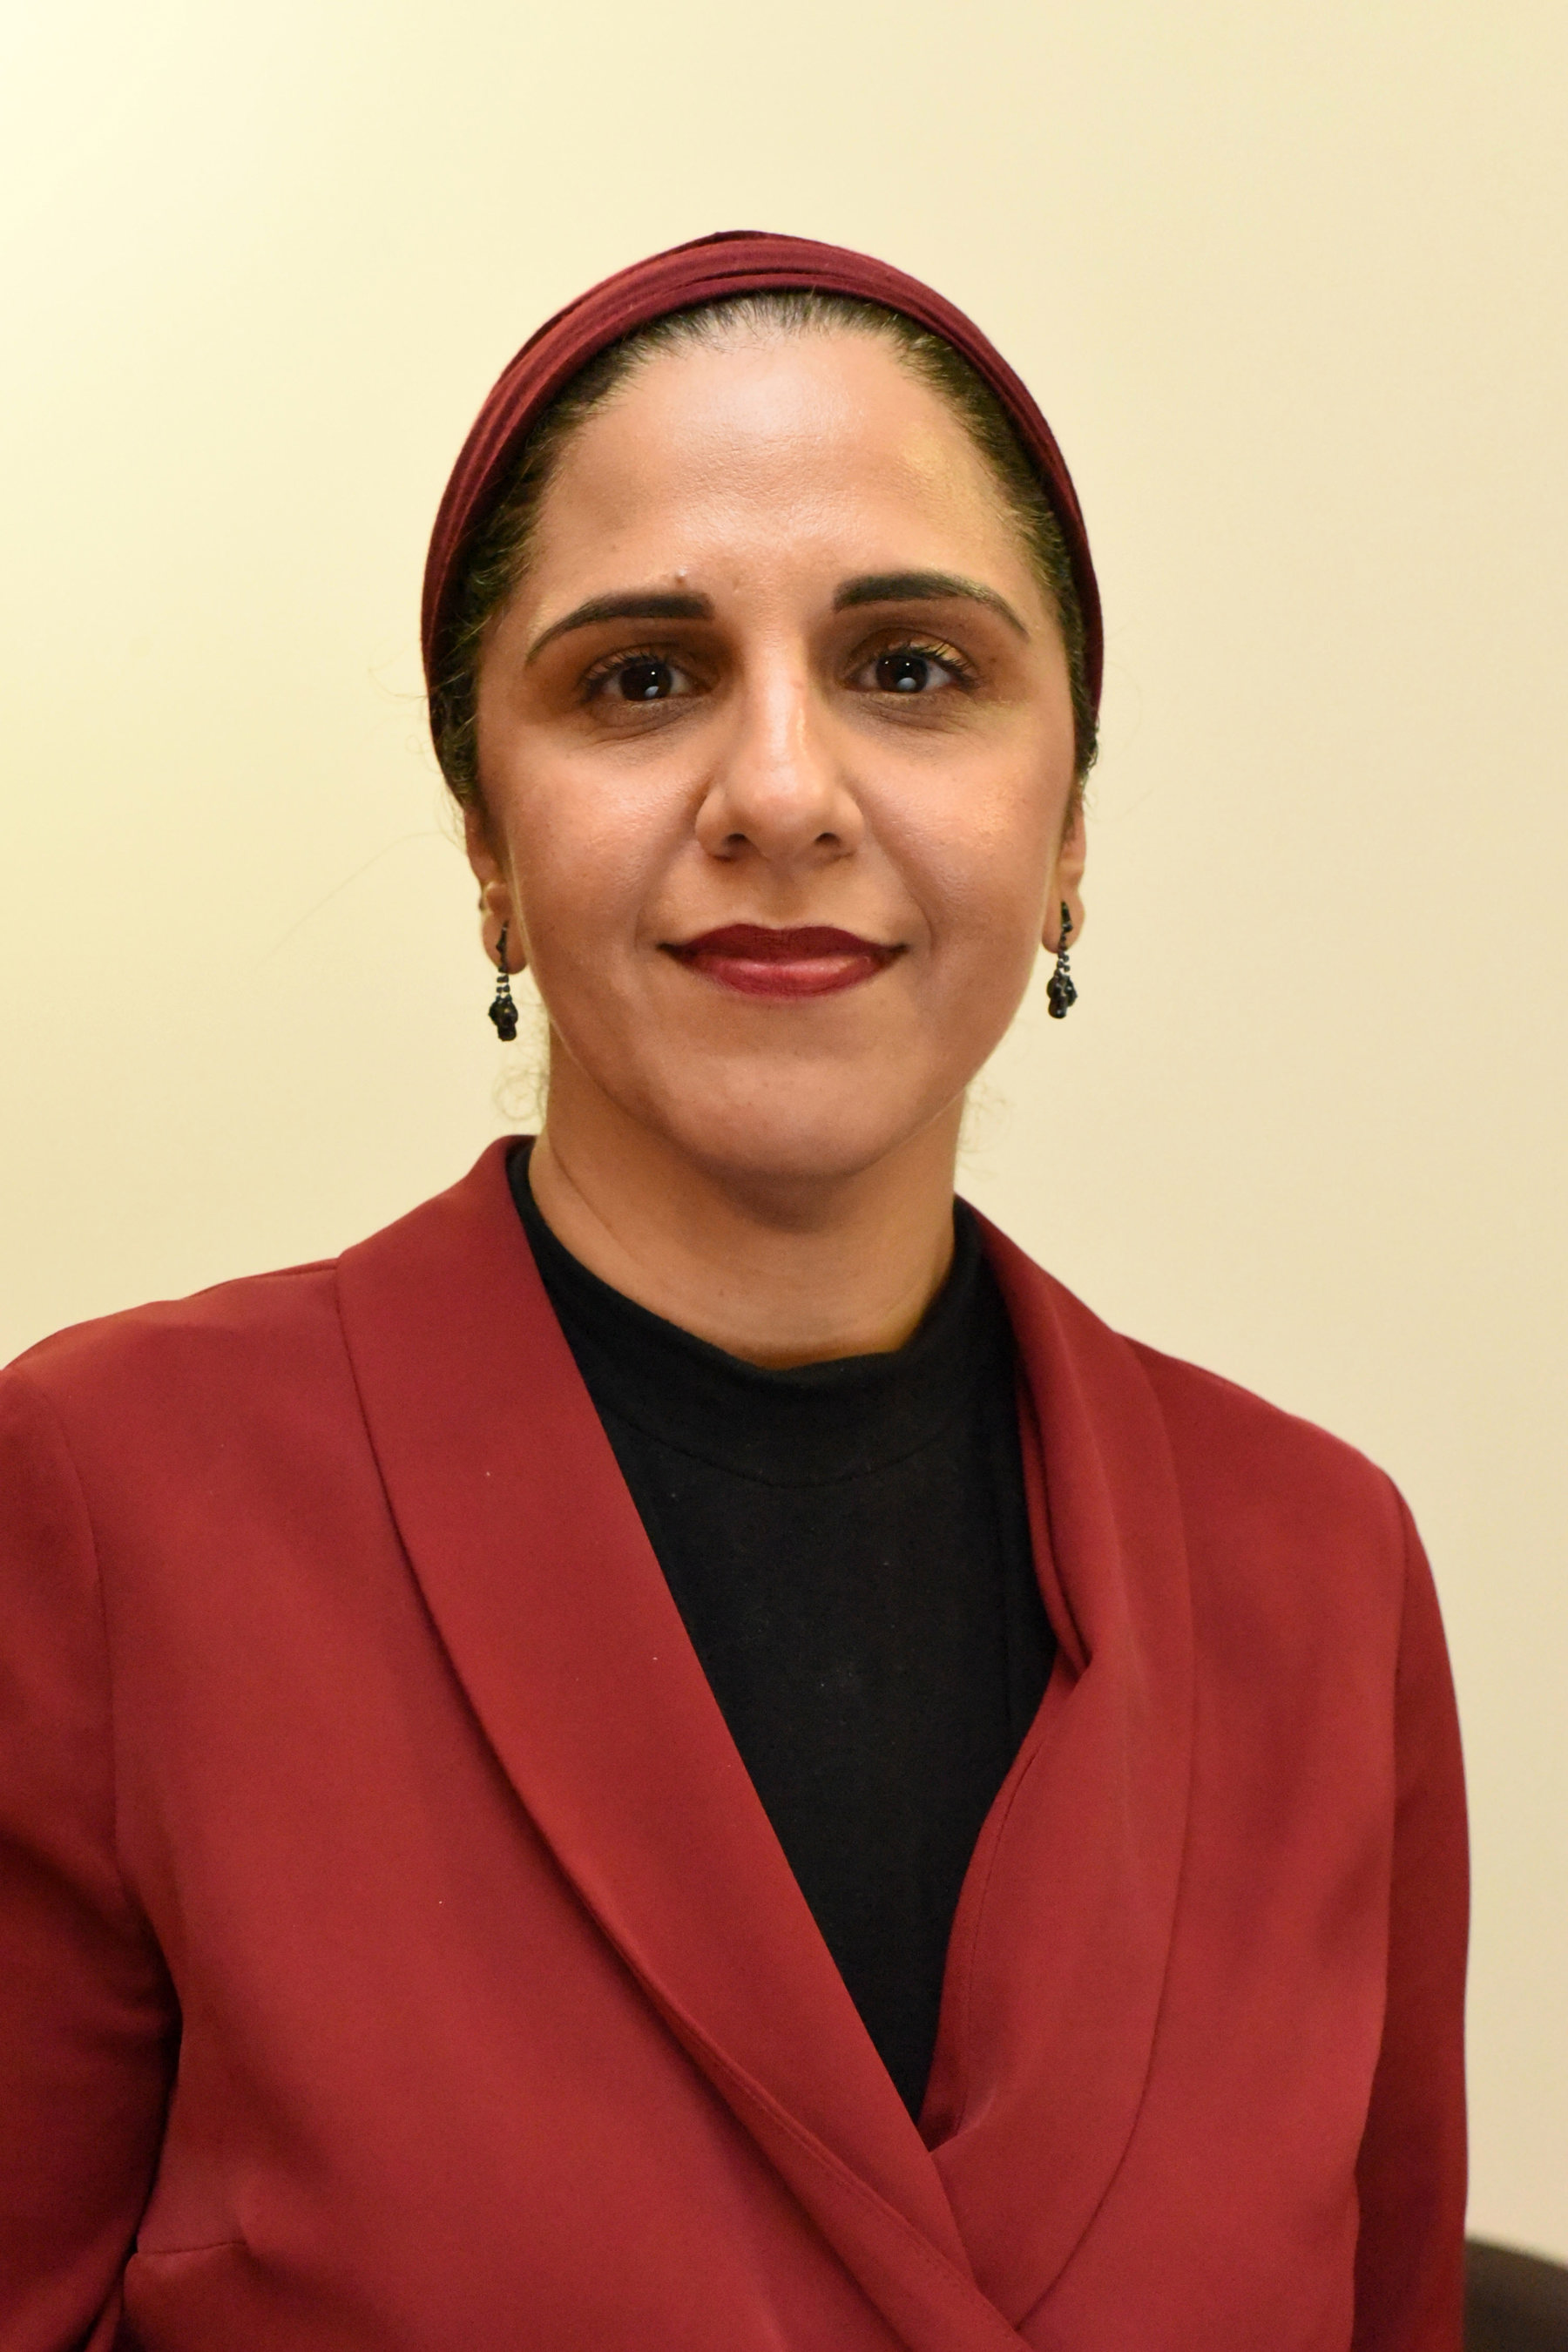 Fozia Irfan smiling at the camera while wearing a red suit jacket with matching red hijab, and black jumper and earrings